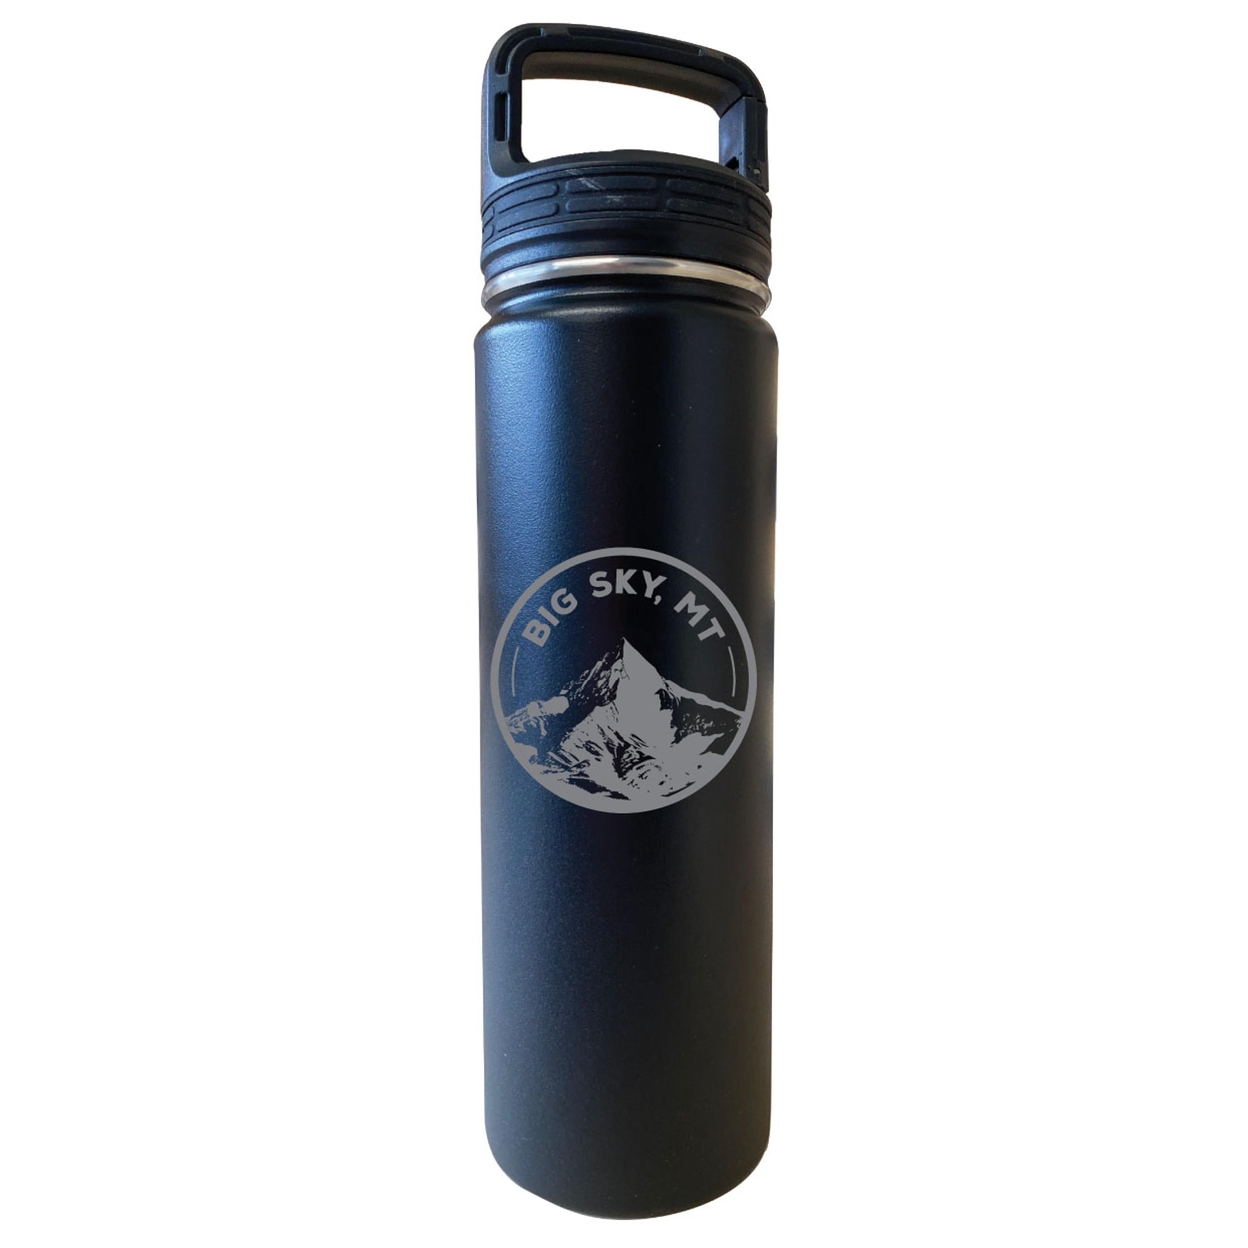 Big Sky Montana Souvenir 32 Oz Engraved Insulated Stainless Steel Tumbler - Black,,2-Pack